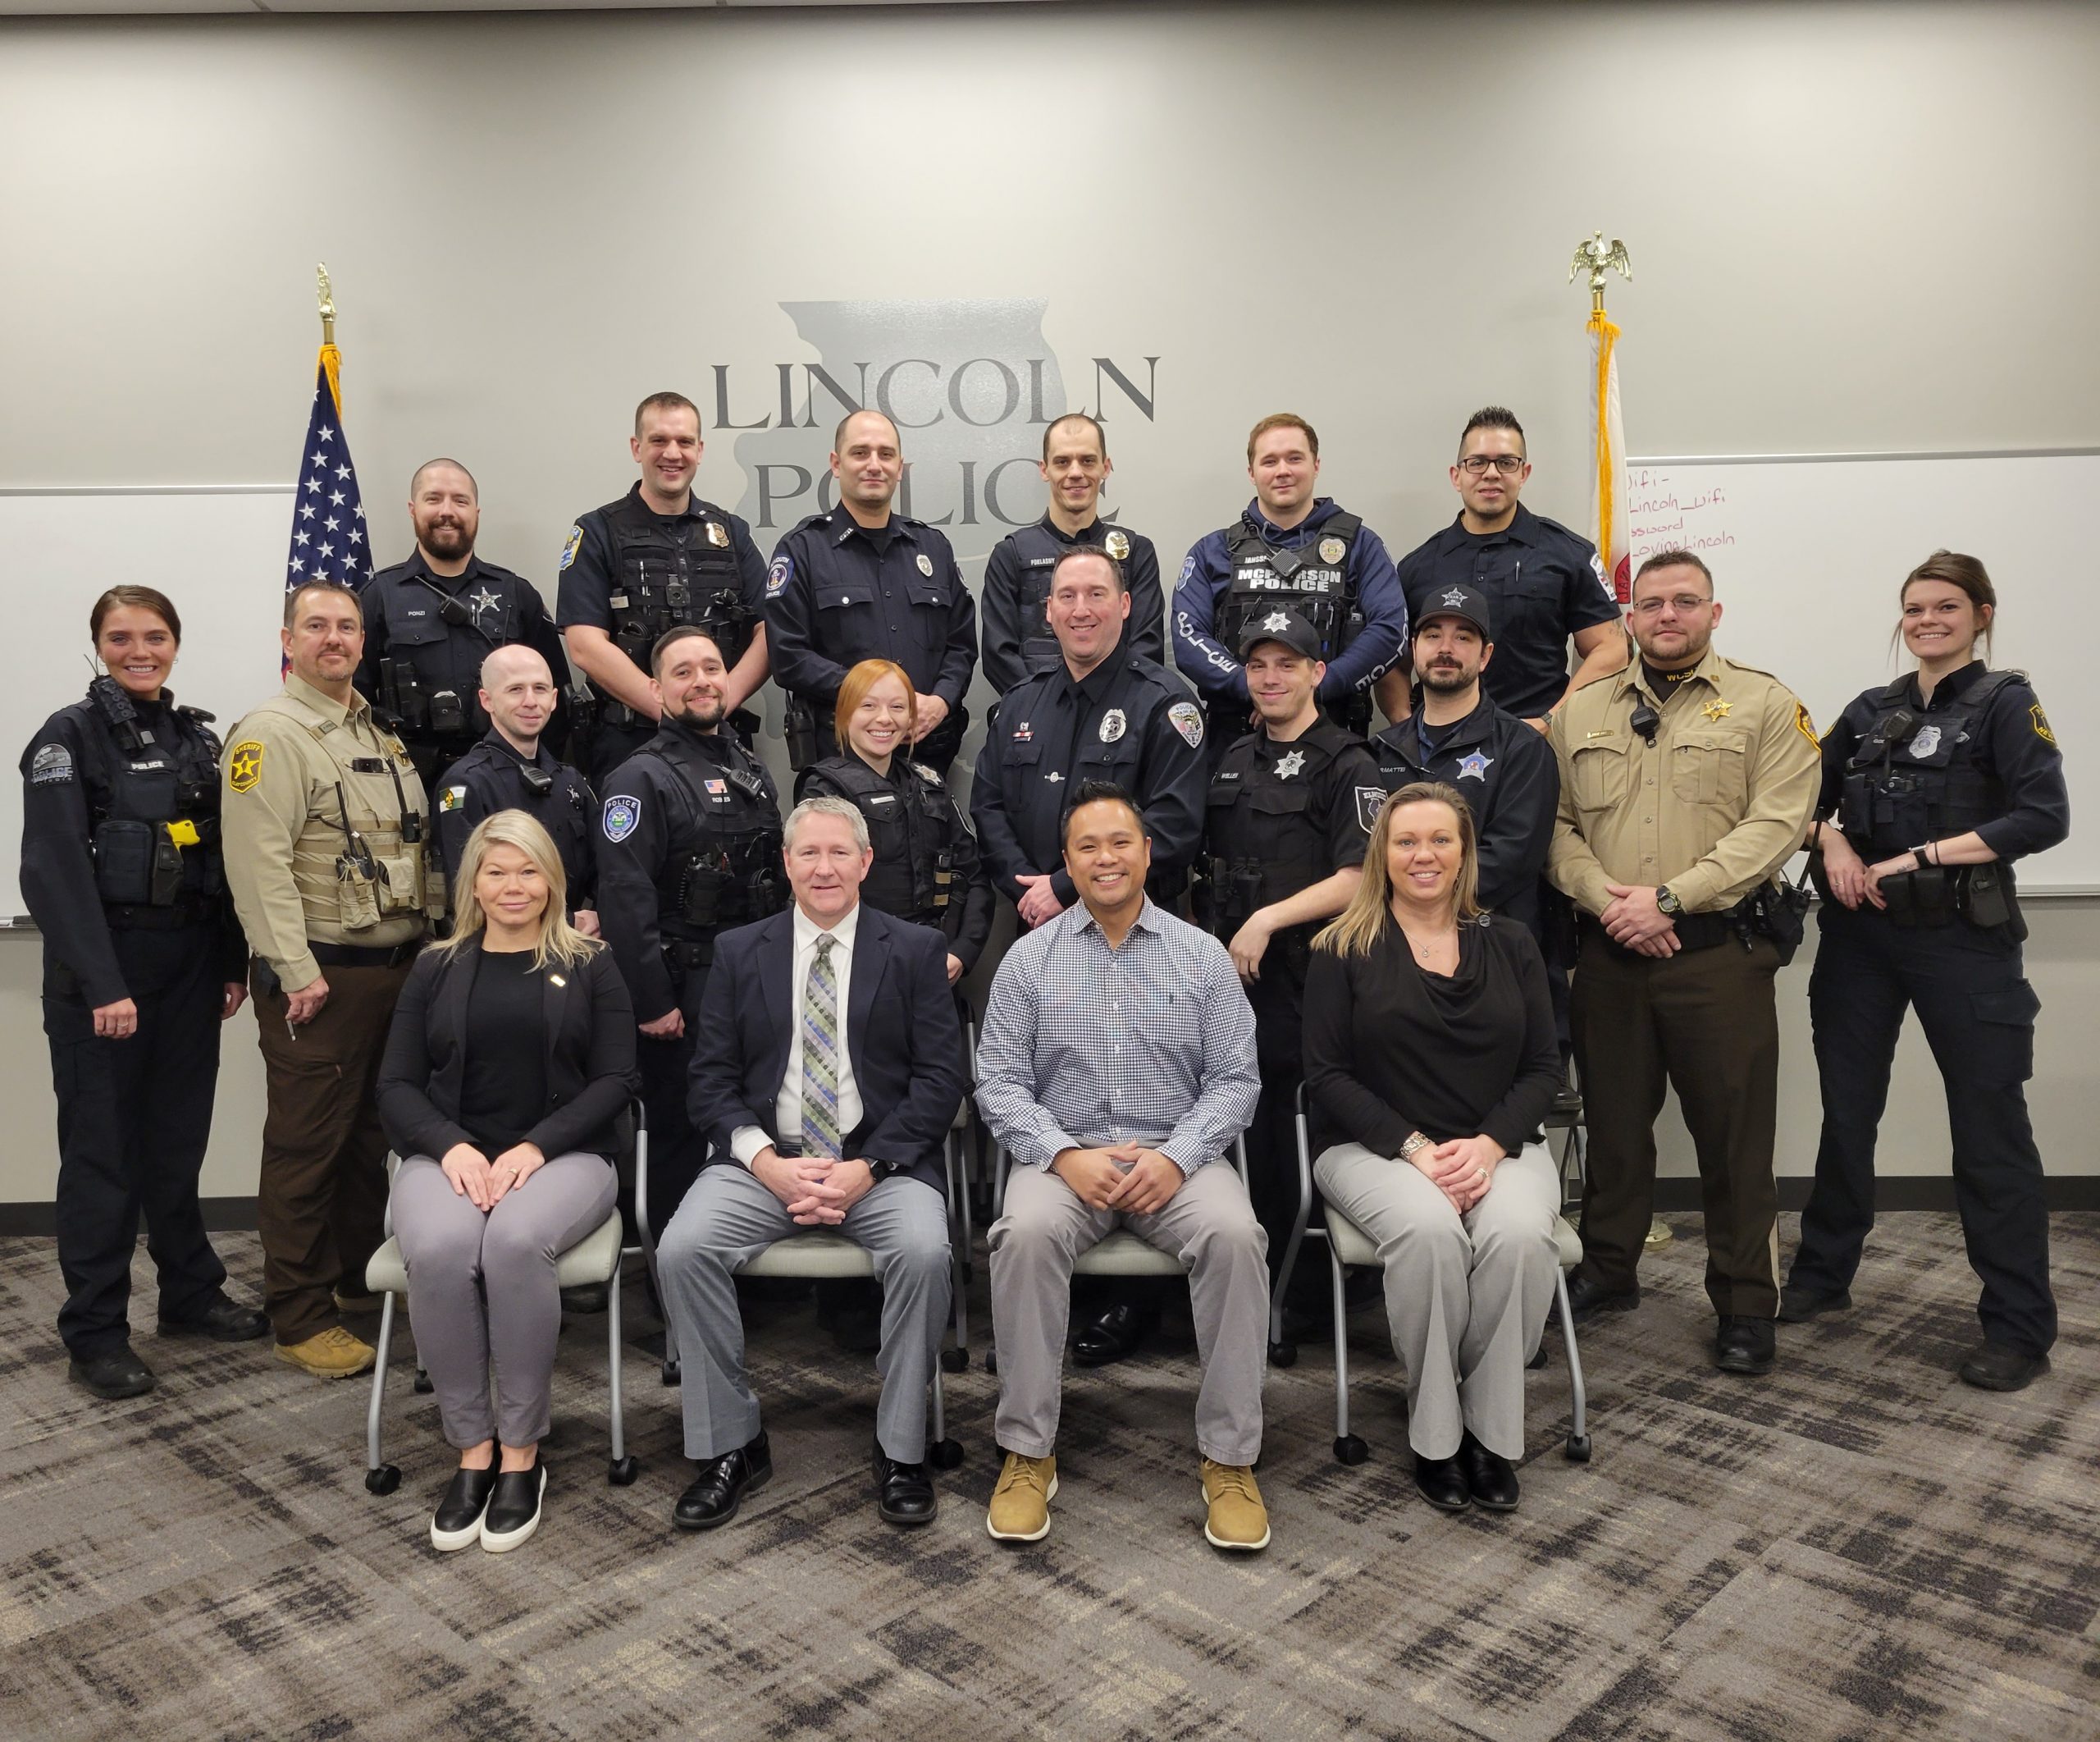 Class Photo from the D.A.R.E. Officer Training held on February 14-25, 2022 in Lincoln, IL